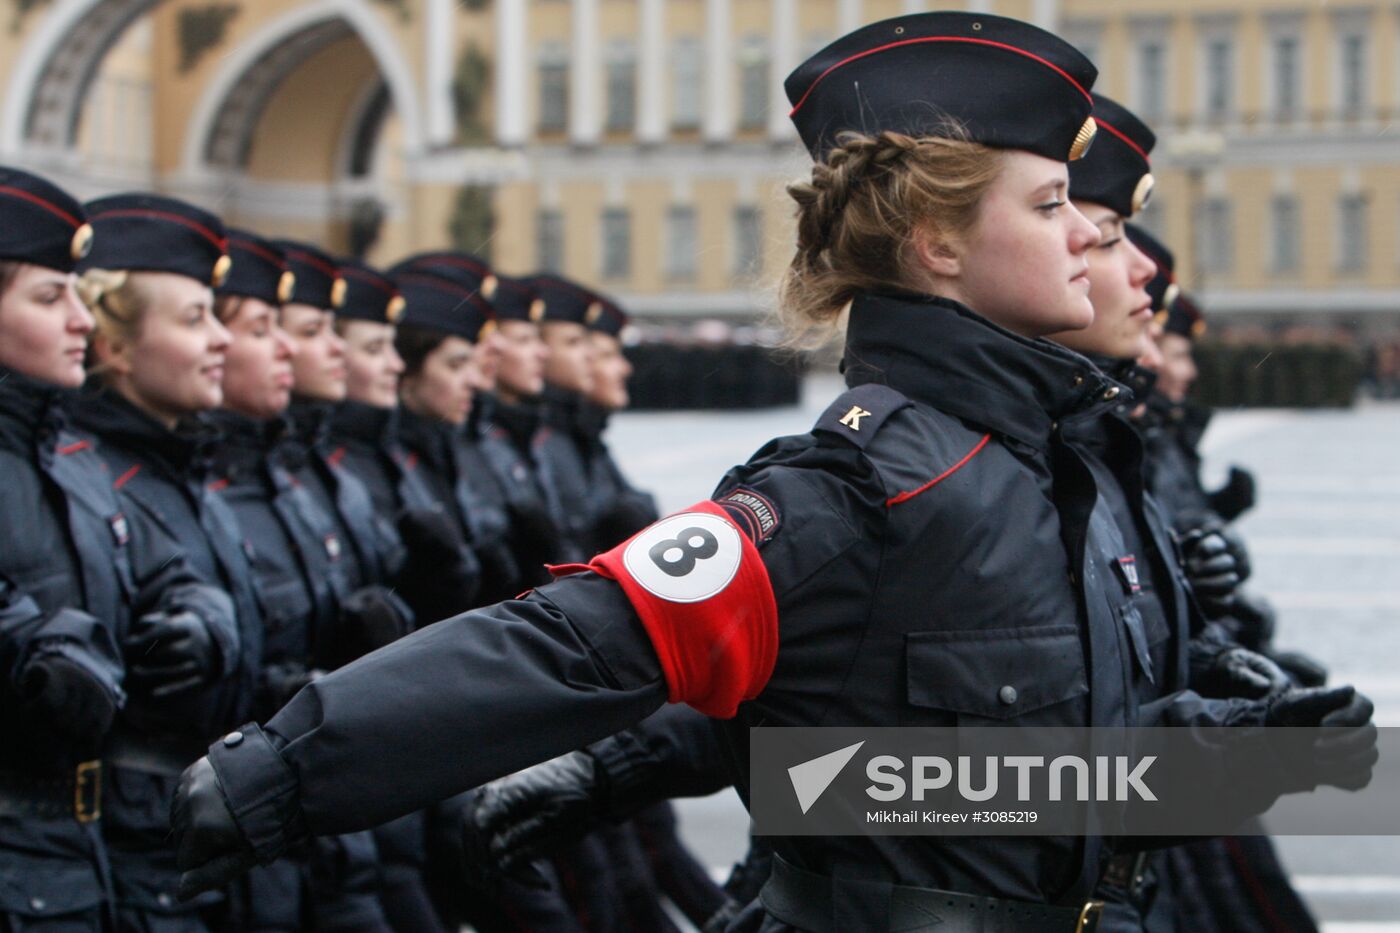 Victory Day Parade practice in St. Petersburg